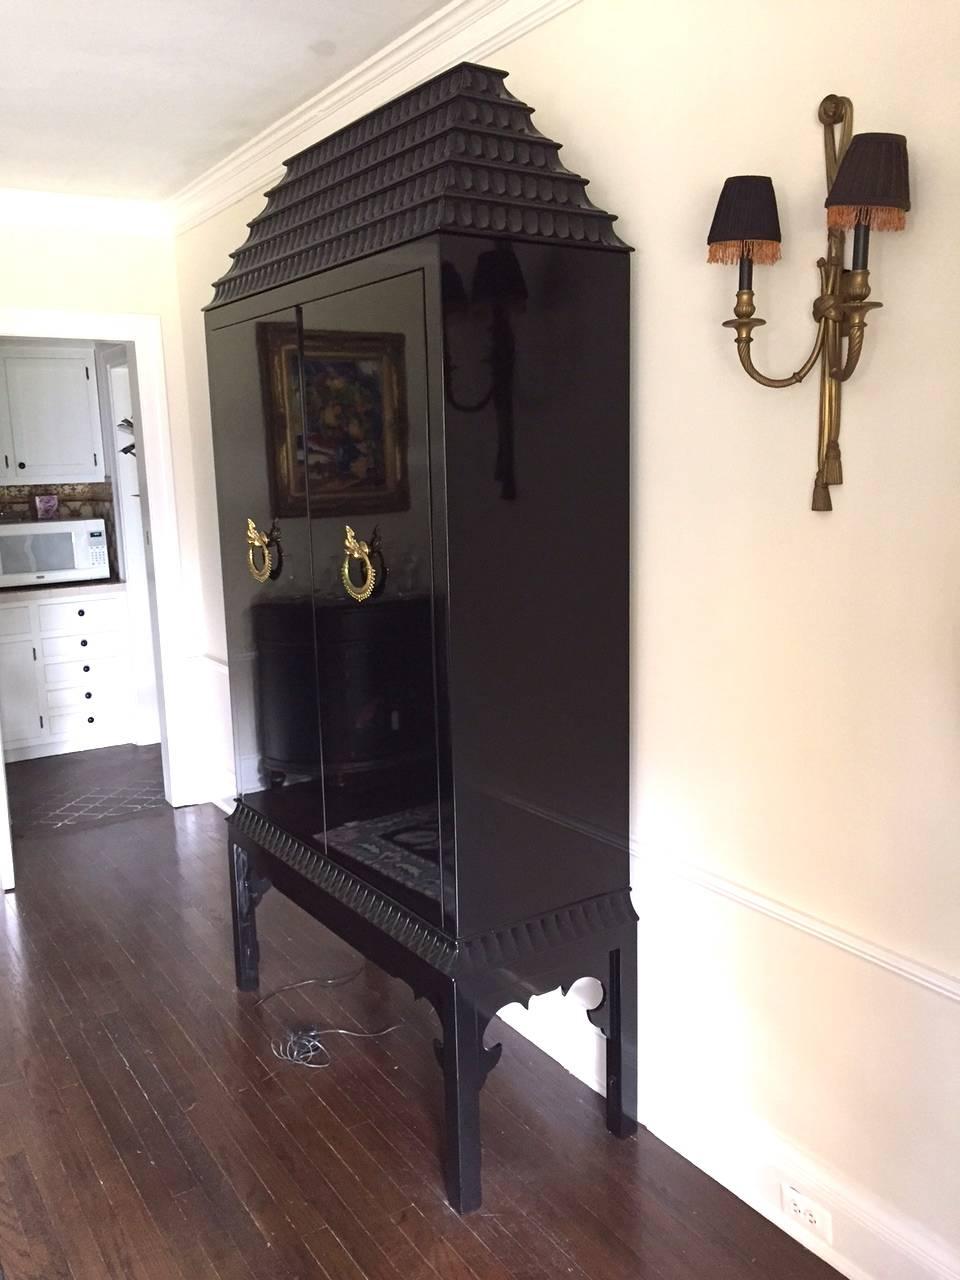 Sensational high gloss black laquer custom cabinet having pagoda style top, Chinese inspired design, gorgeous brass dragon motiffe pulls, mirrored interior back. Cleverly outfitted as a bar cabinet with wine rack, area to hang crystal glasses, a